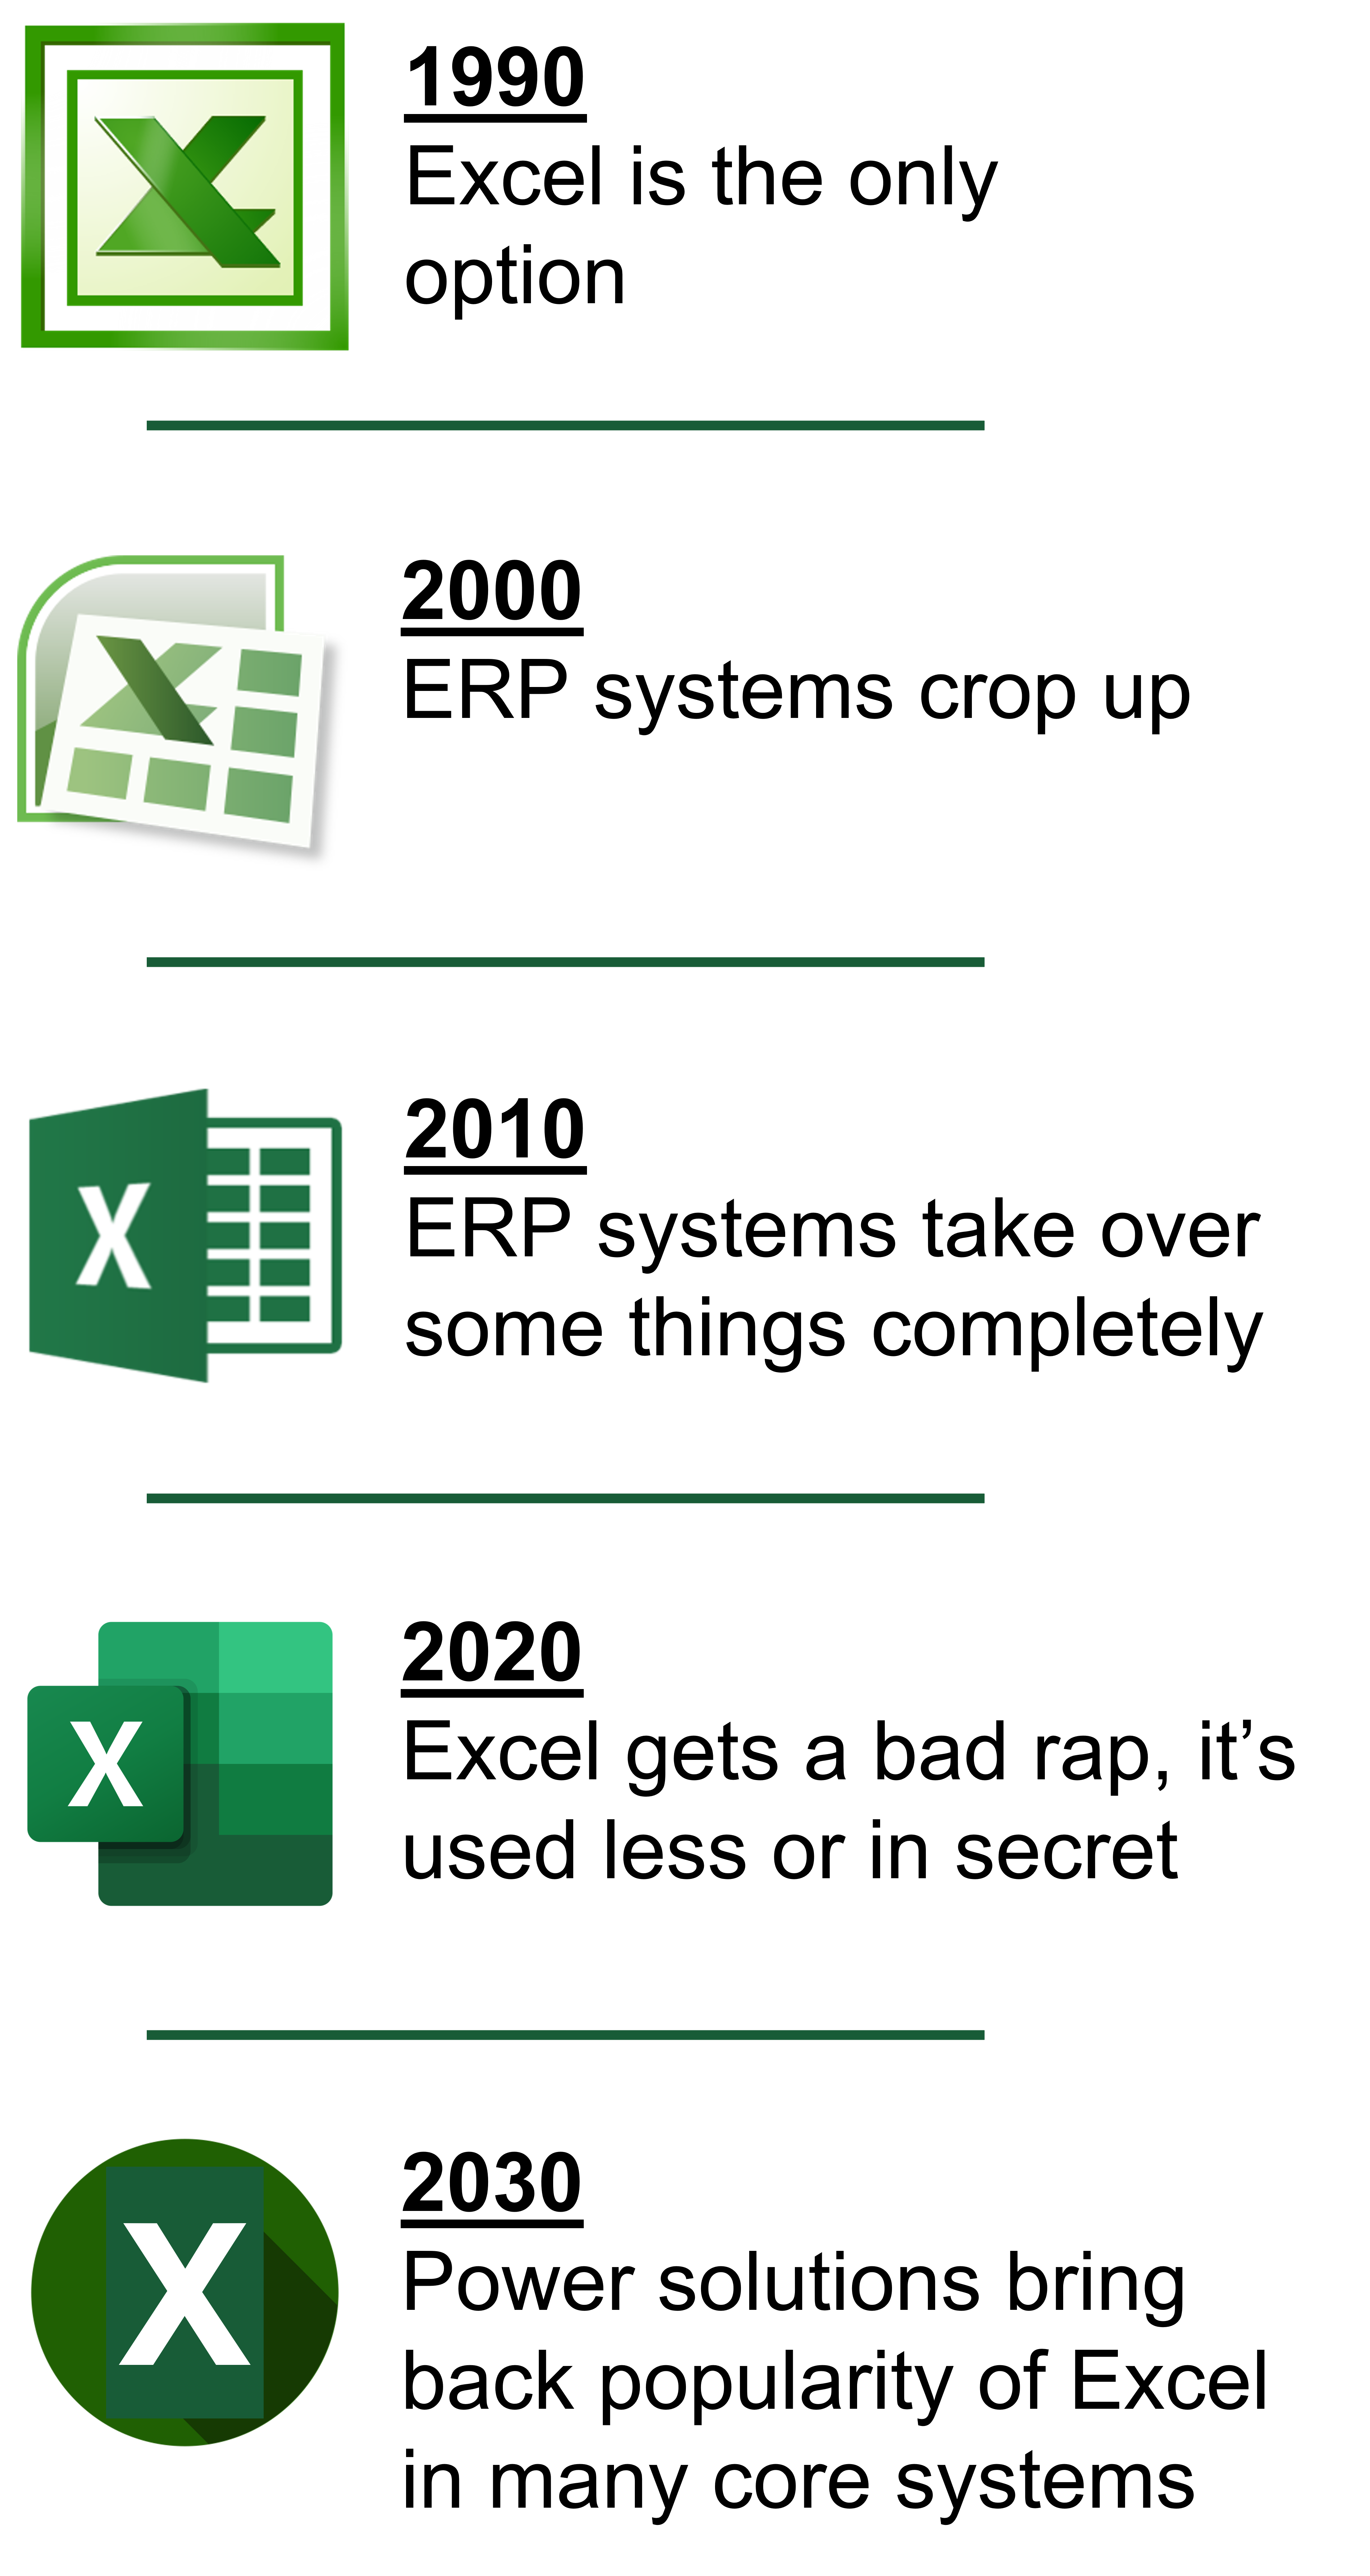 Excel Timeline // Why use Excel // PerfectXL